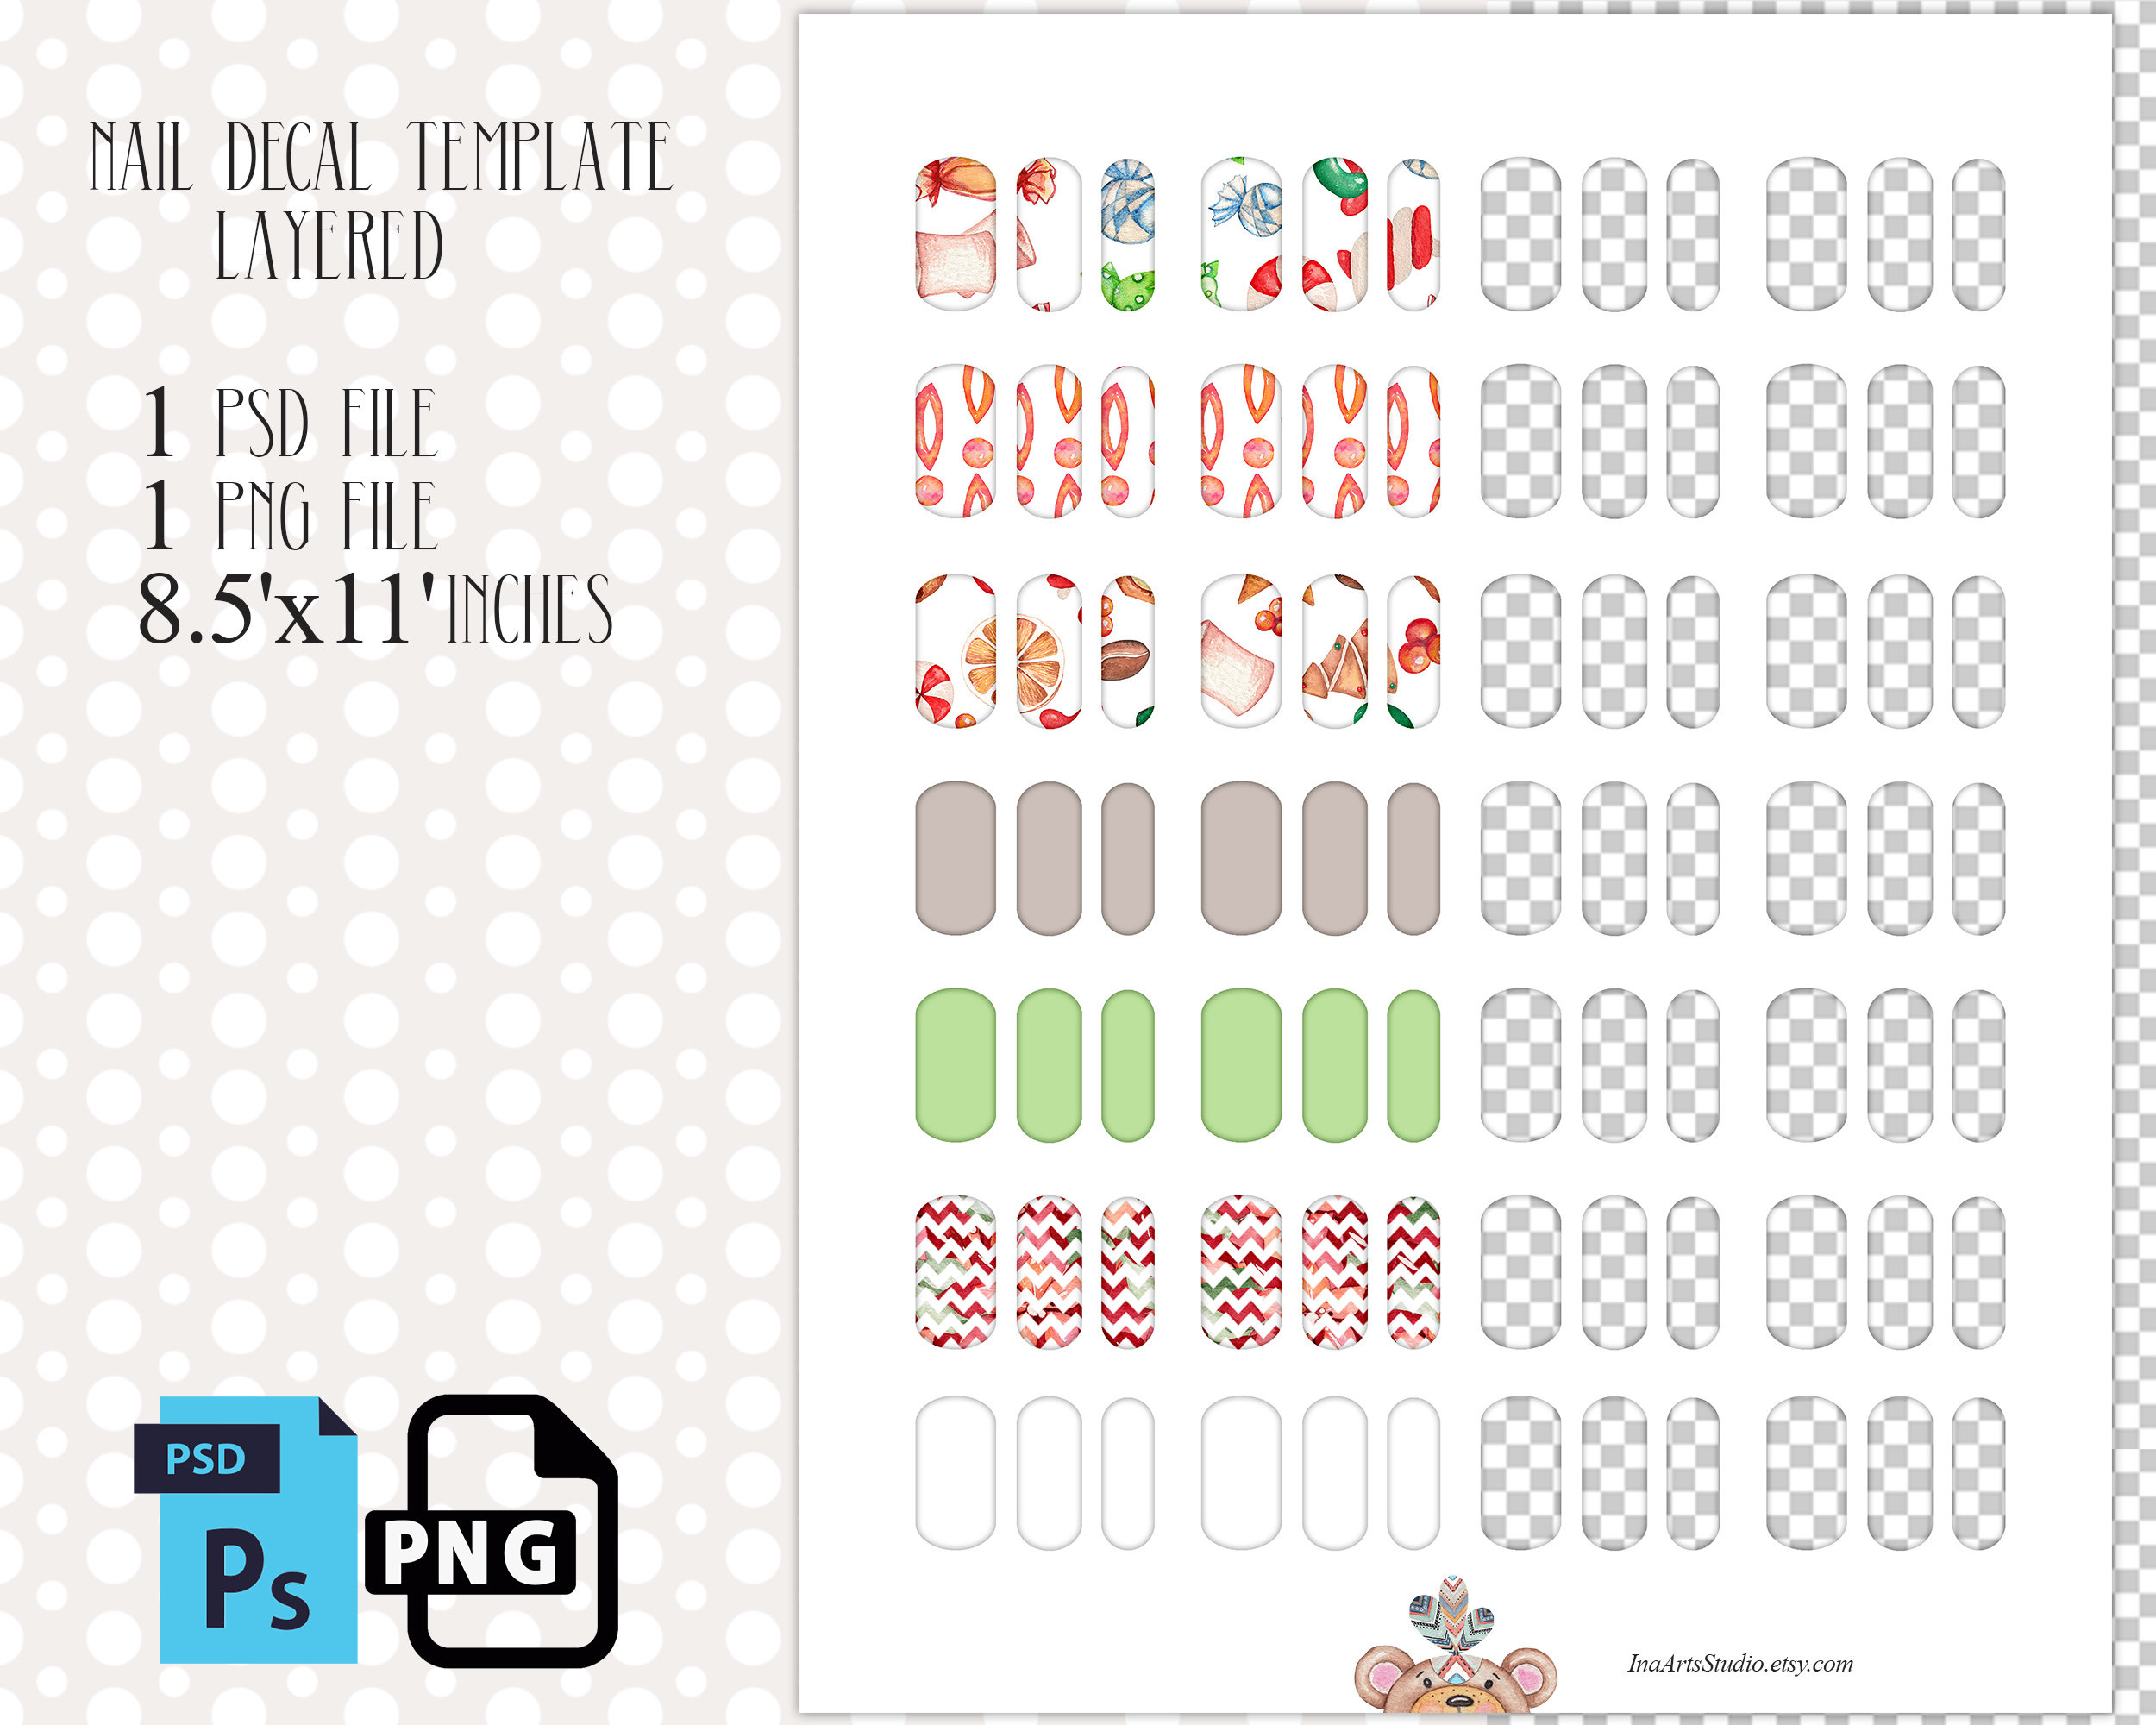 DIY Water Decal Nail Art with Stickers - wide 2